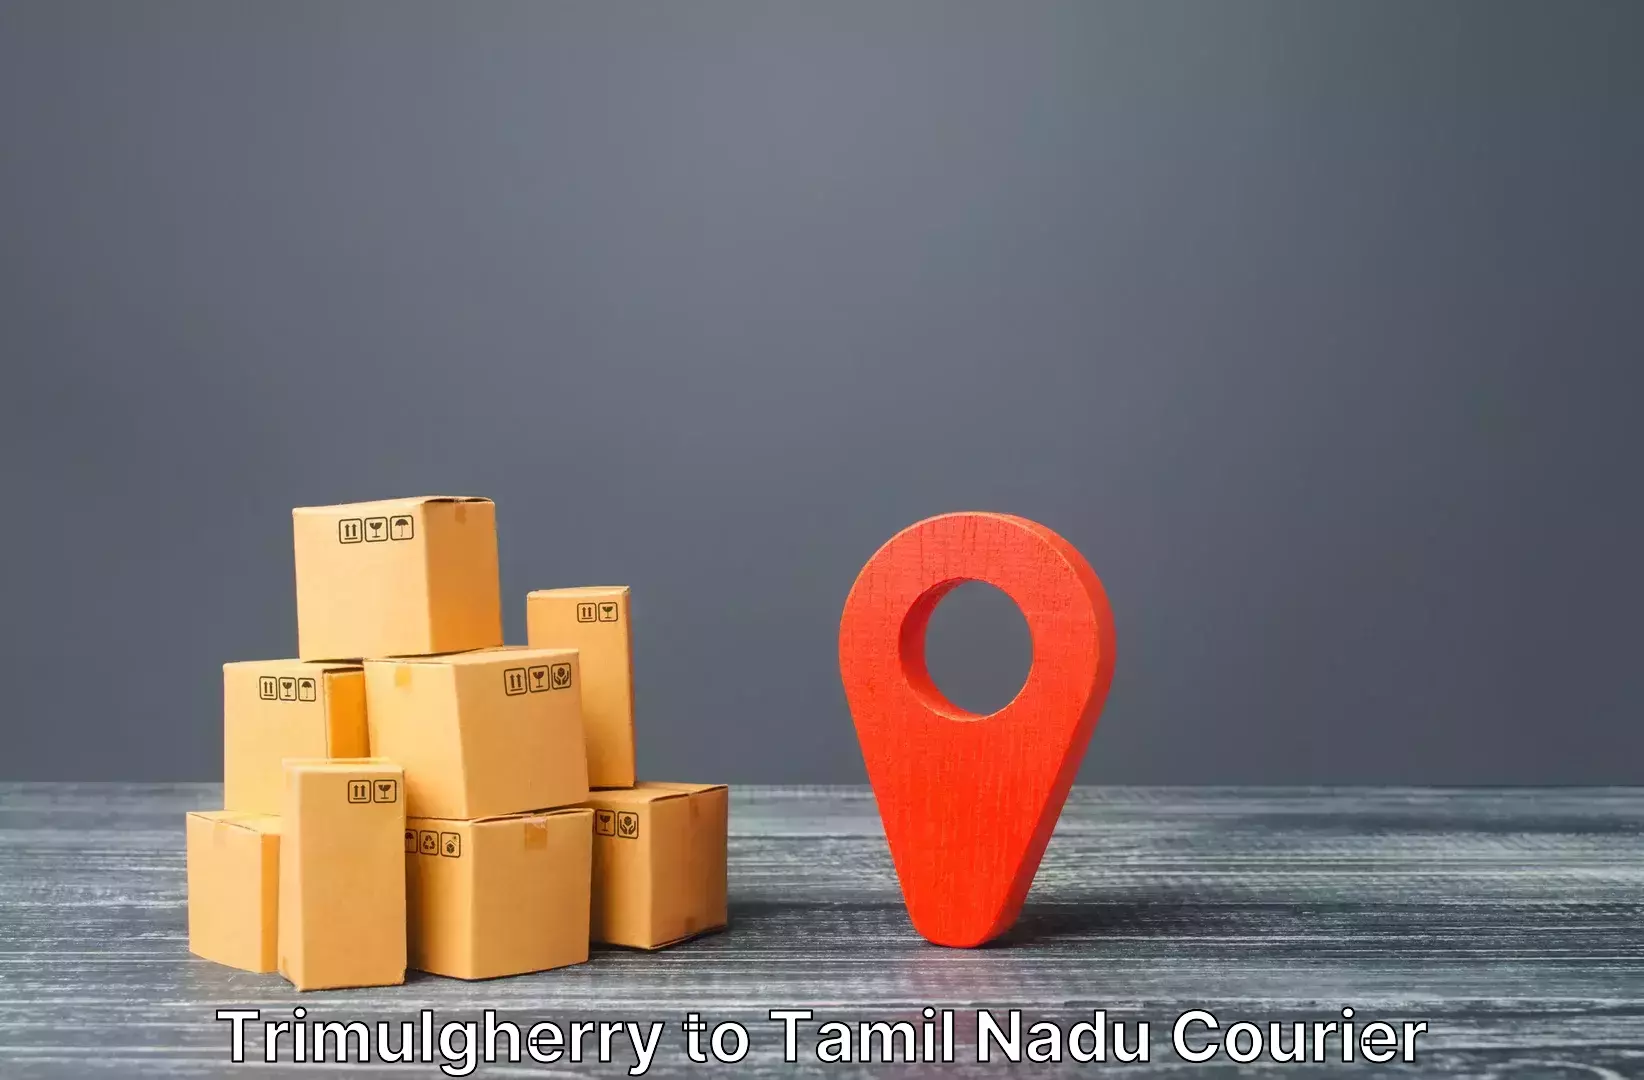 Automated luggage transport Trimulgherry to Tamil Nadu